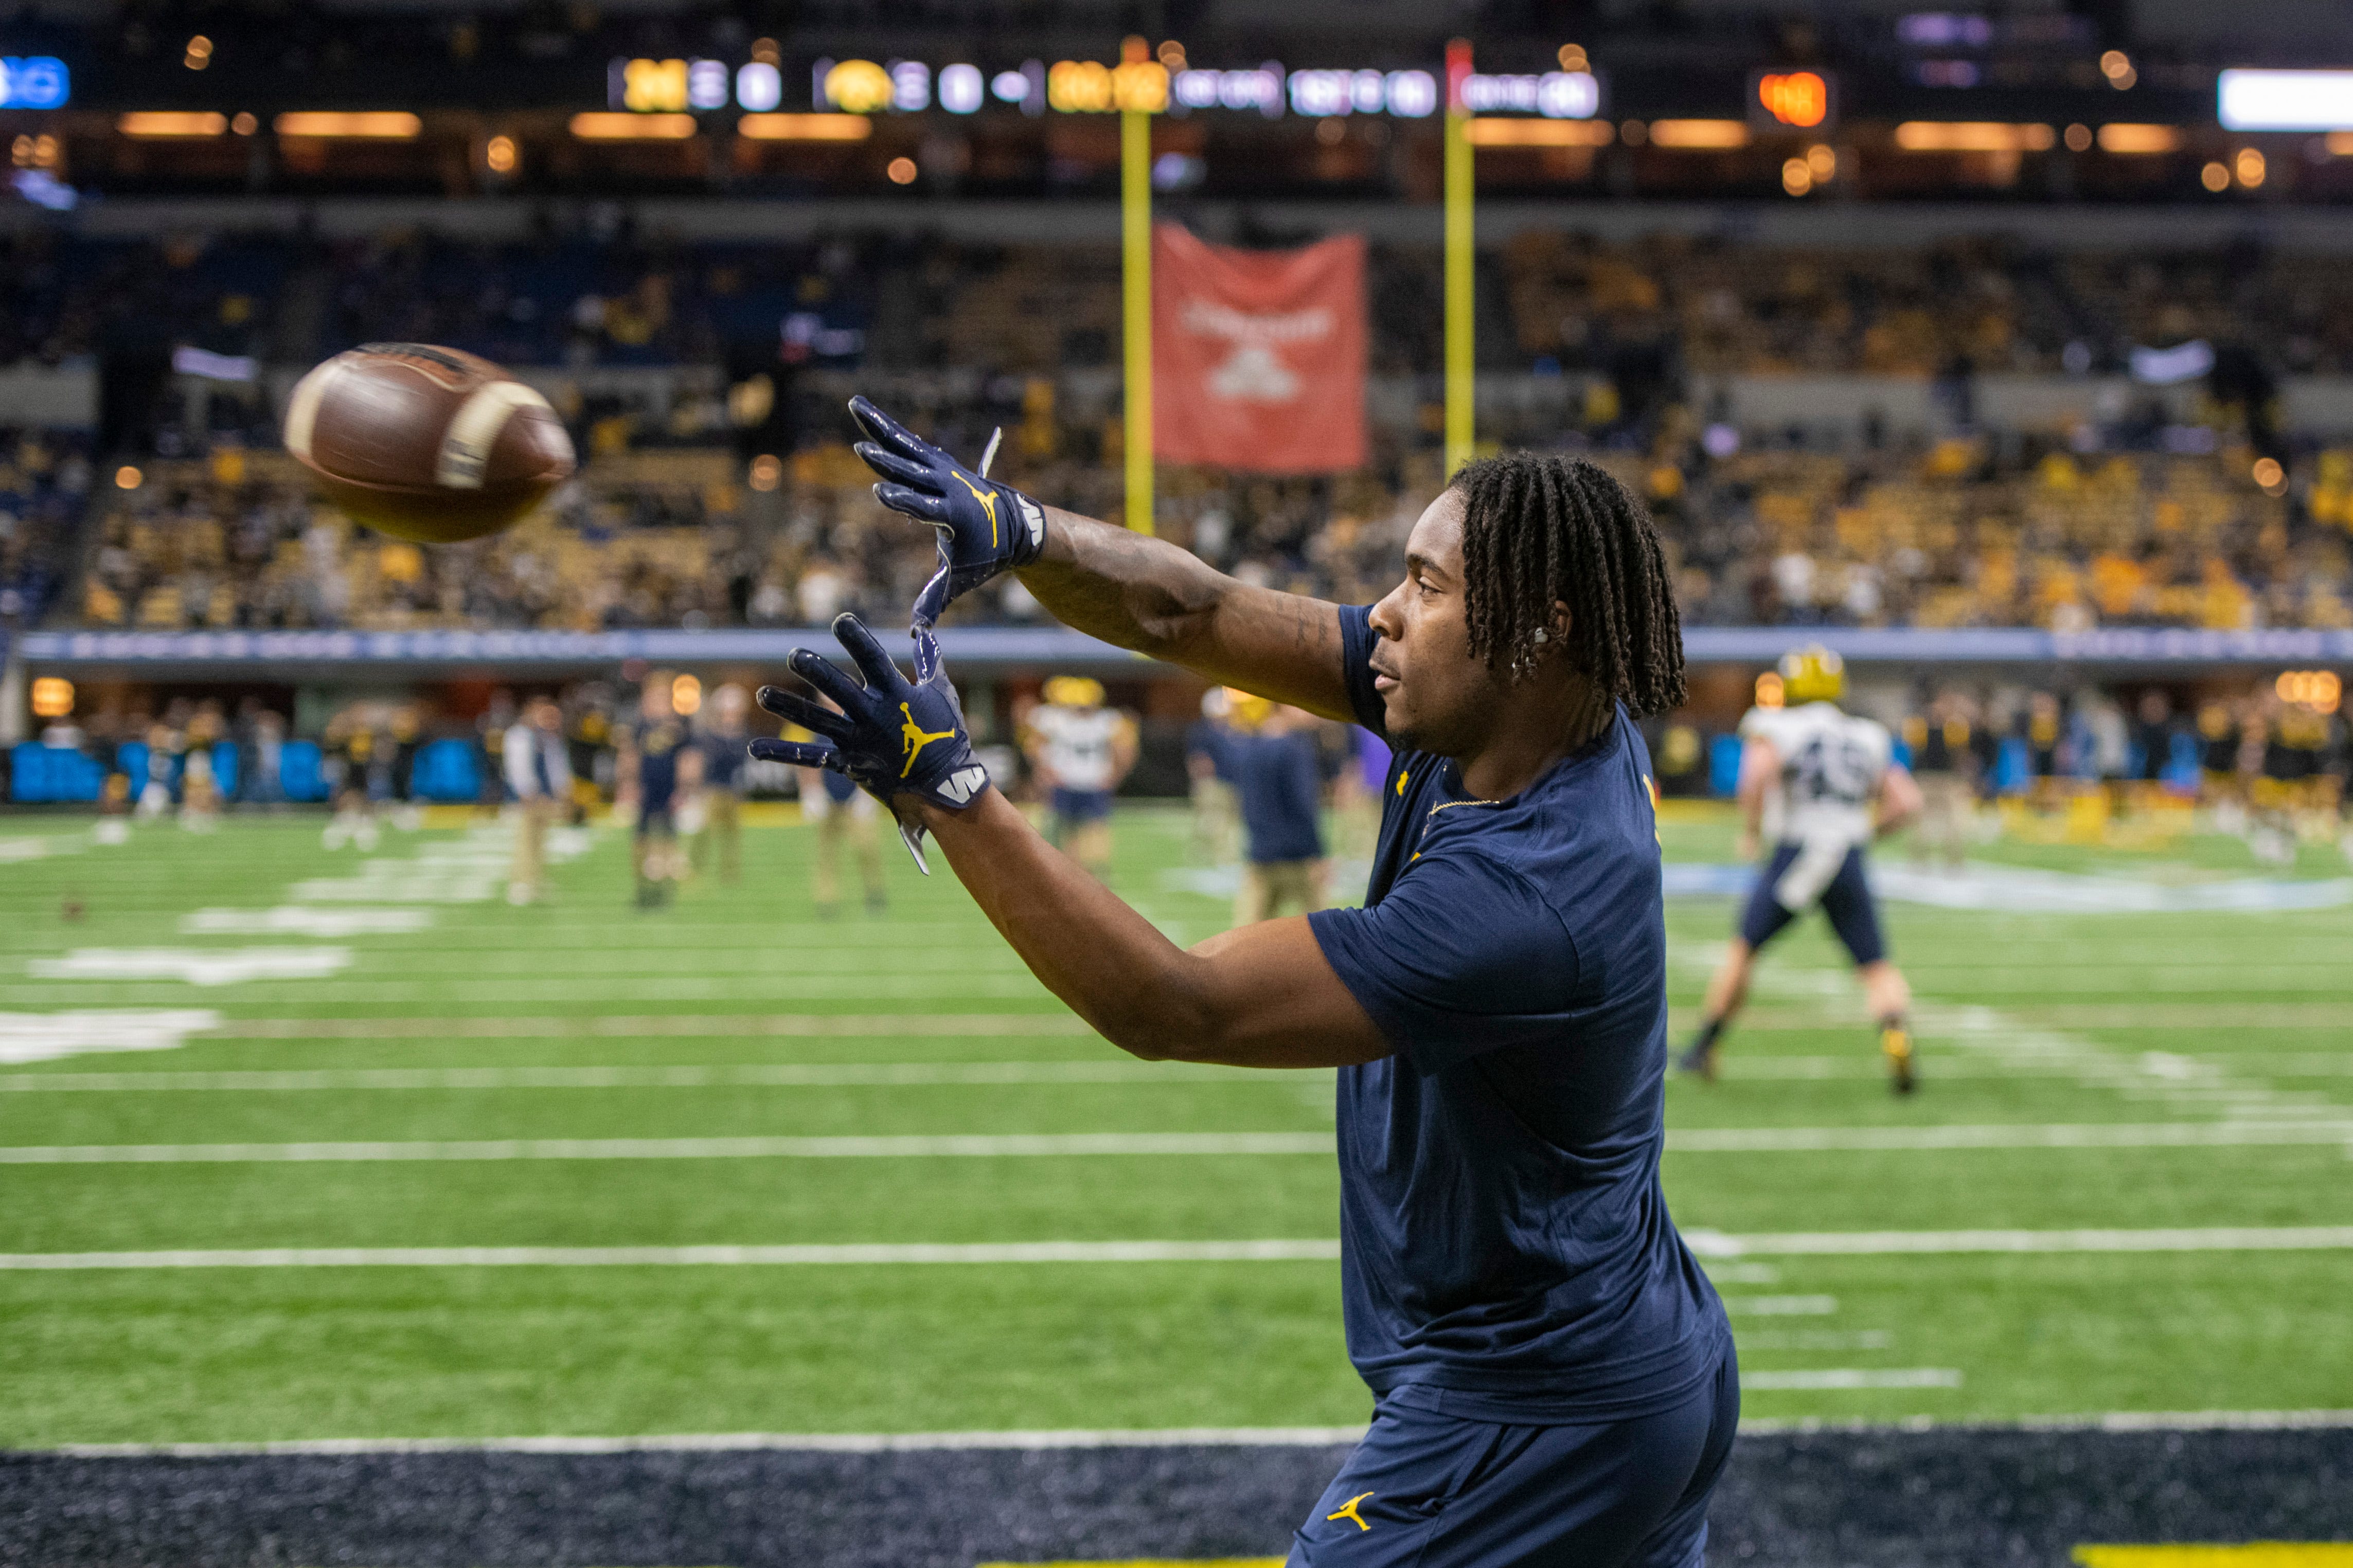 Michigan wide receiver Andrel Anthony catches a pass during warmups before the start of the Big Ten championship game.